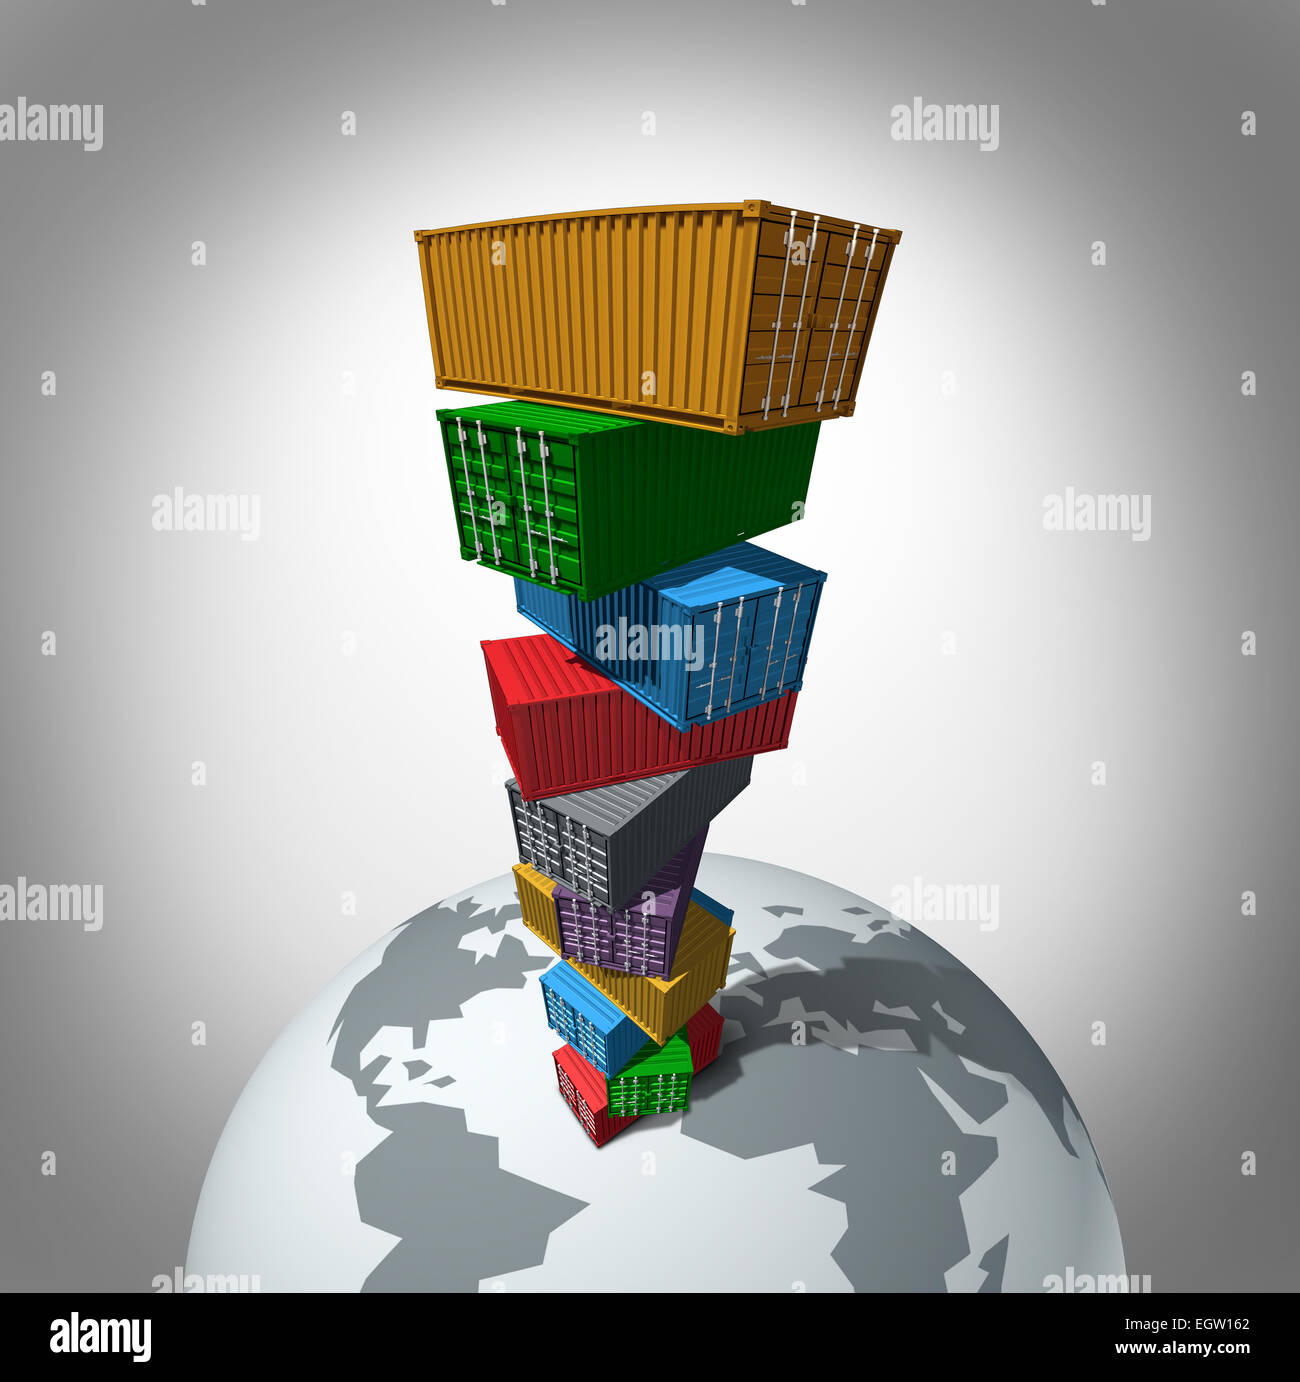 Global cargo transportation concept as a high stack of transport containers towering over the planet as a symbol for international trade for importing and exporting. Stock Photo